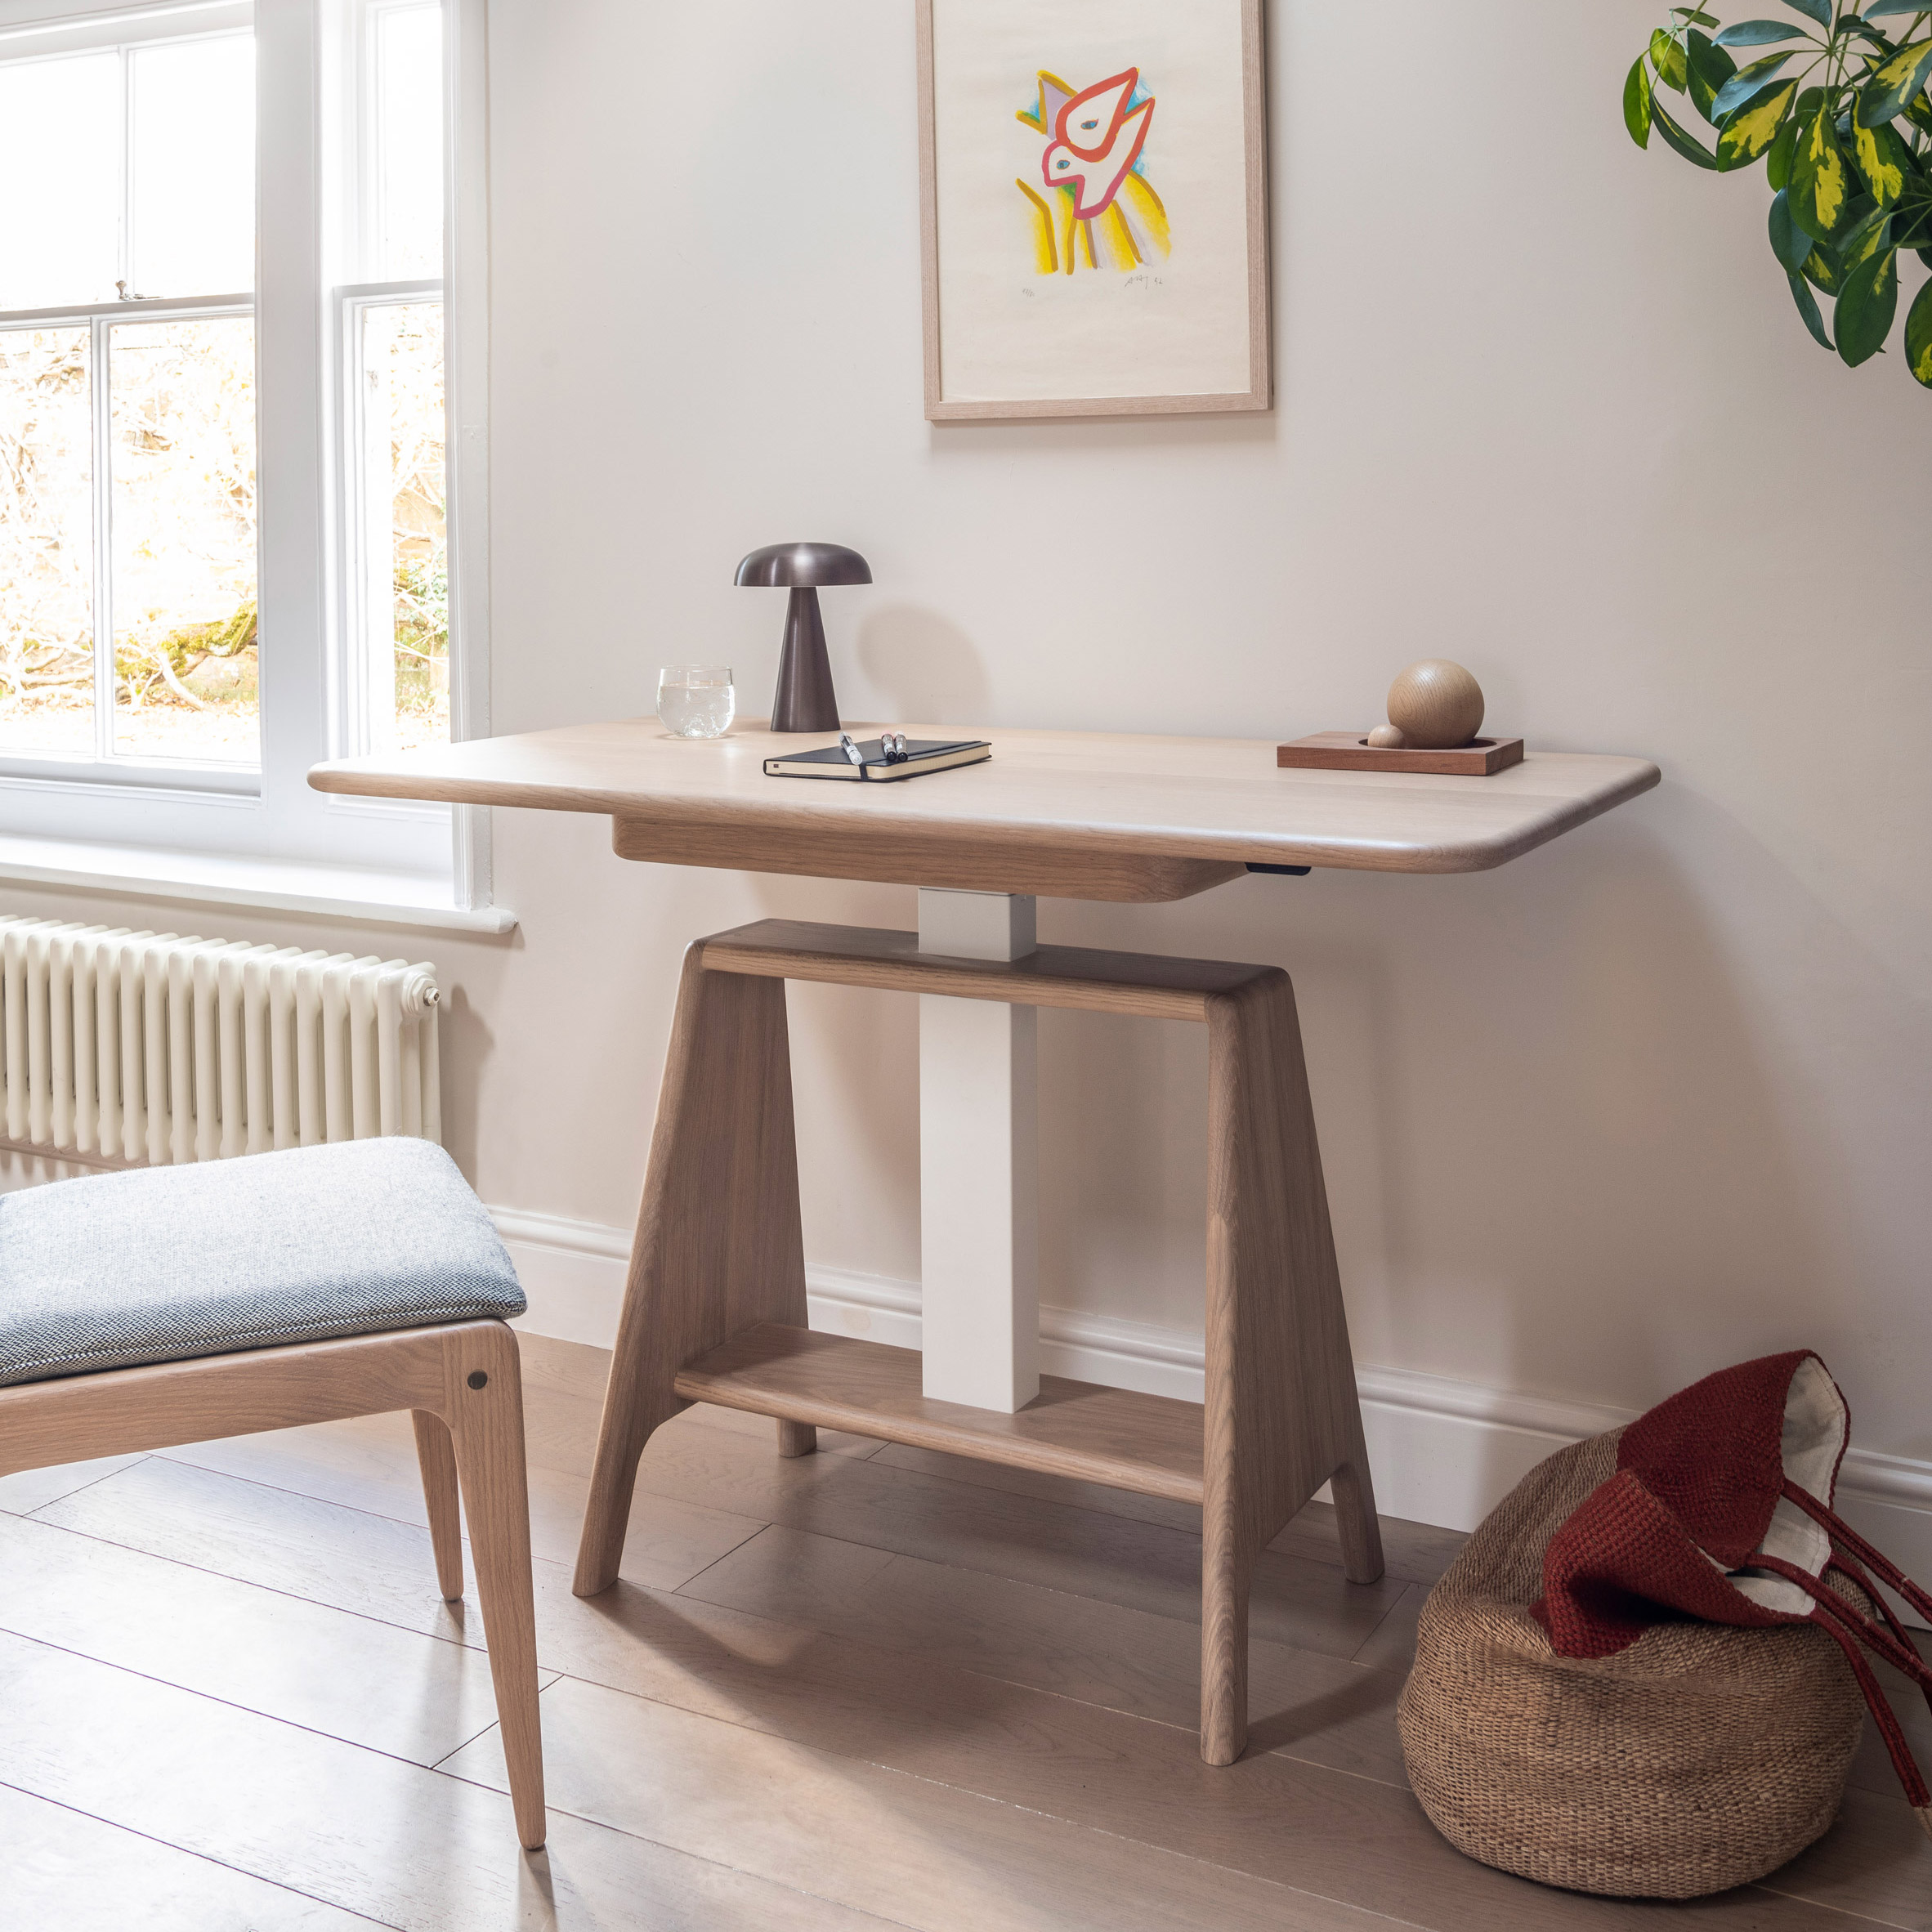 Noa sit-stand desk by Benchmark in the seated setting